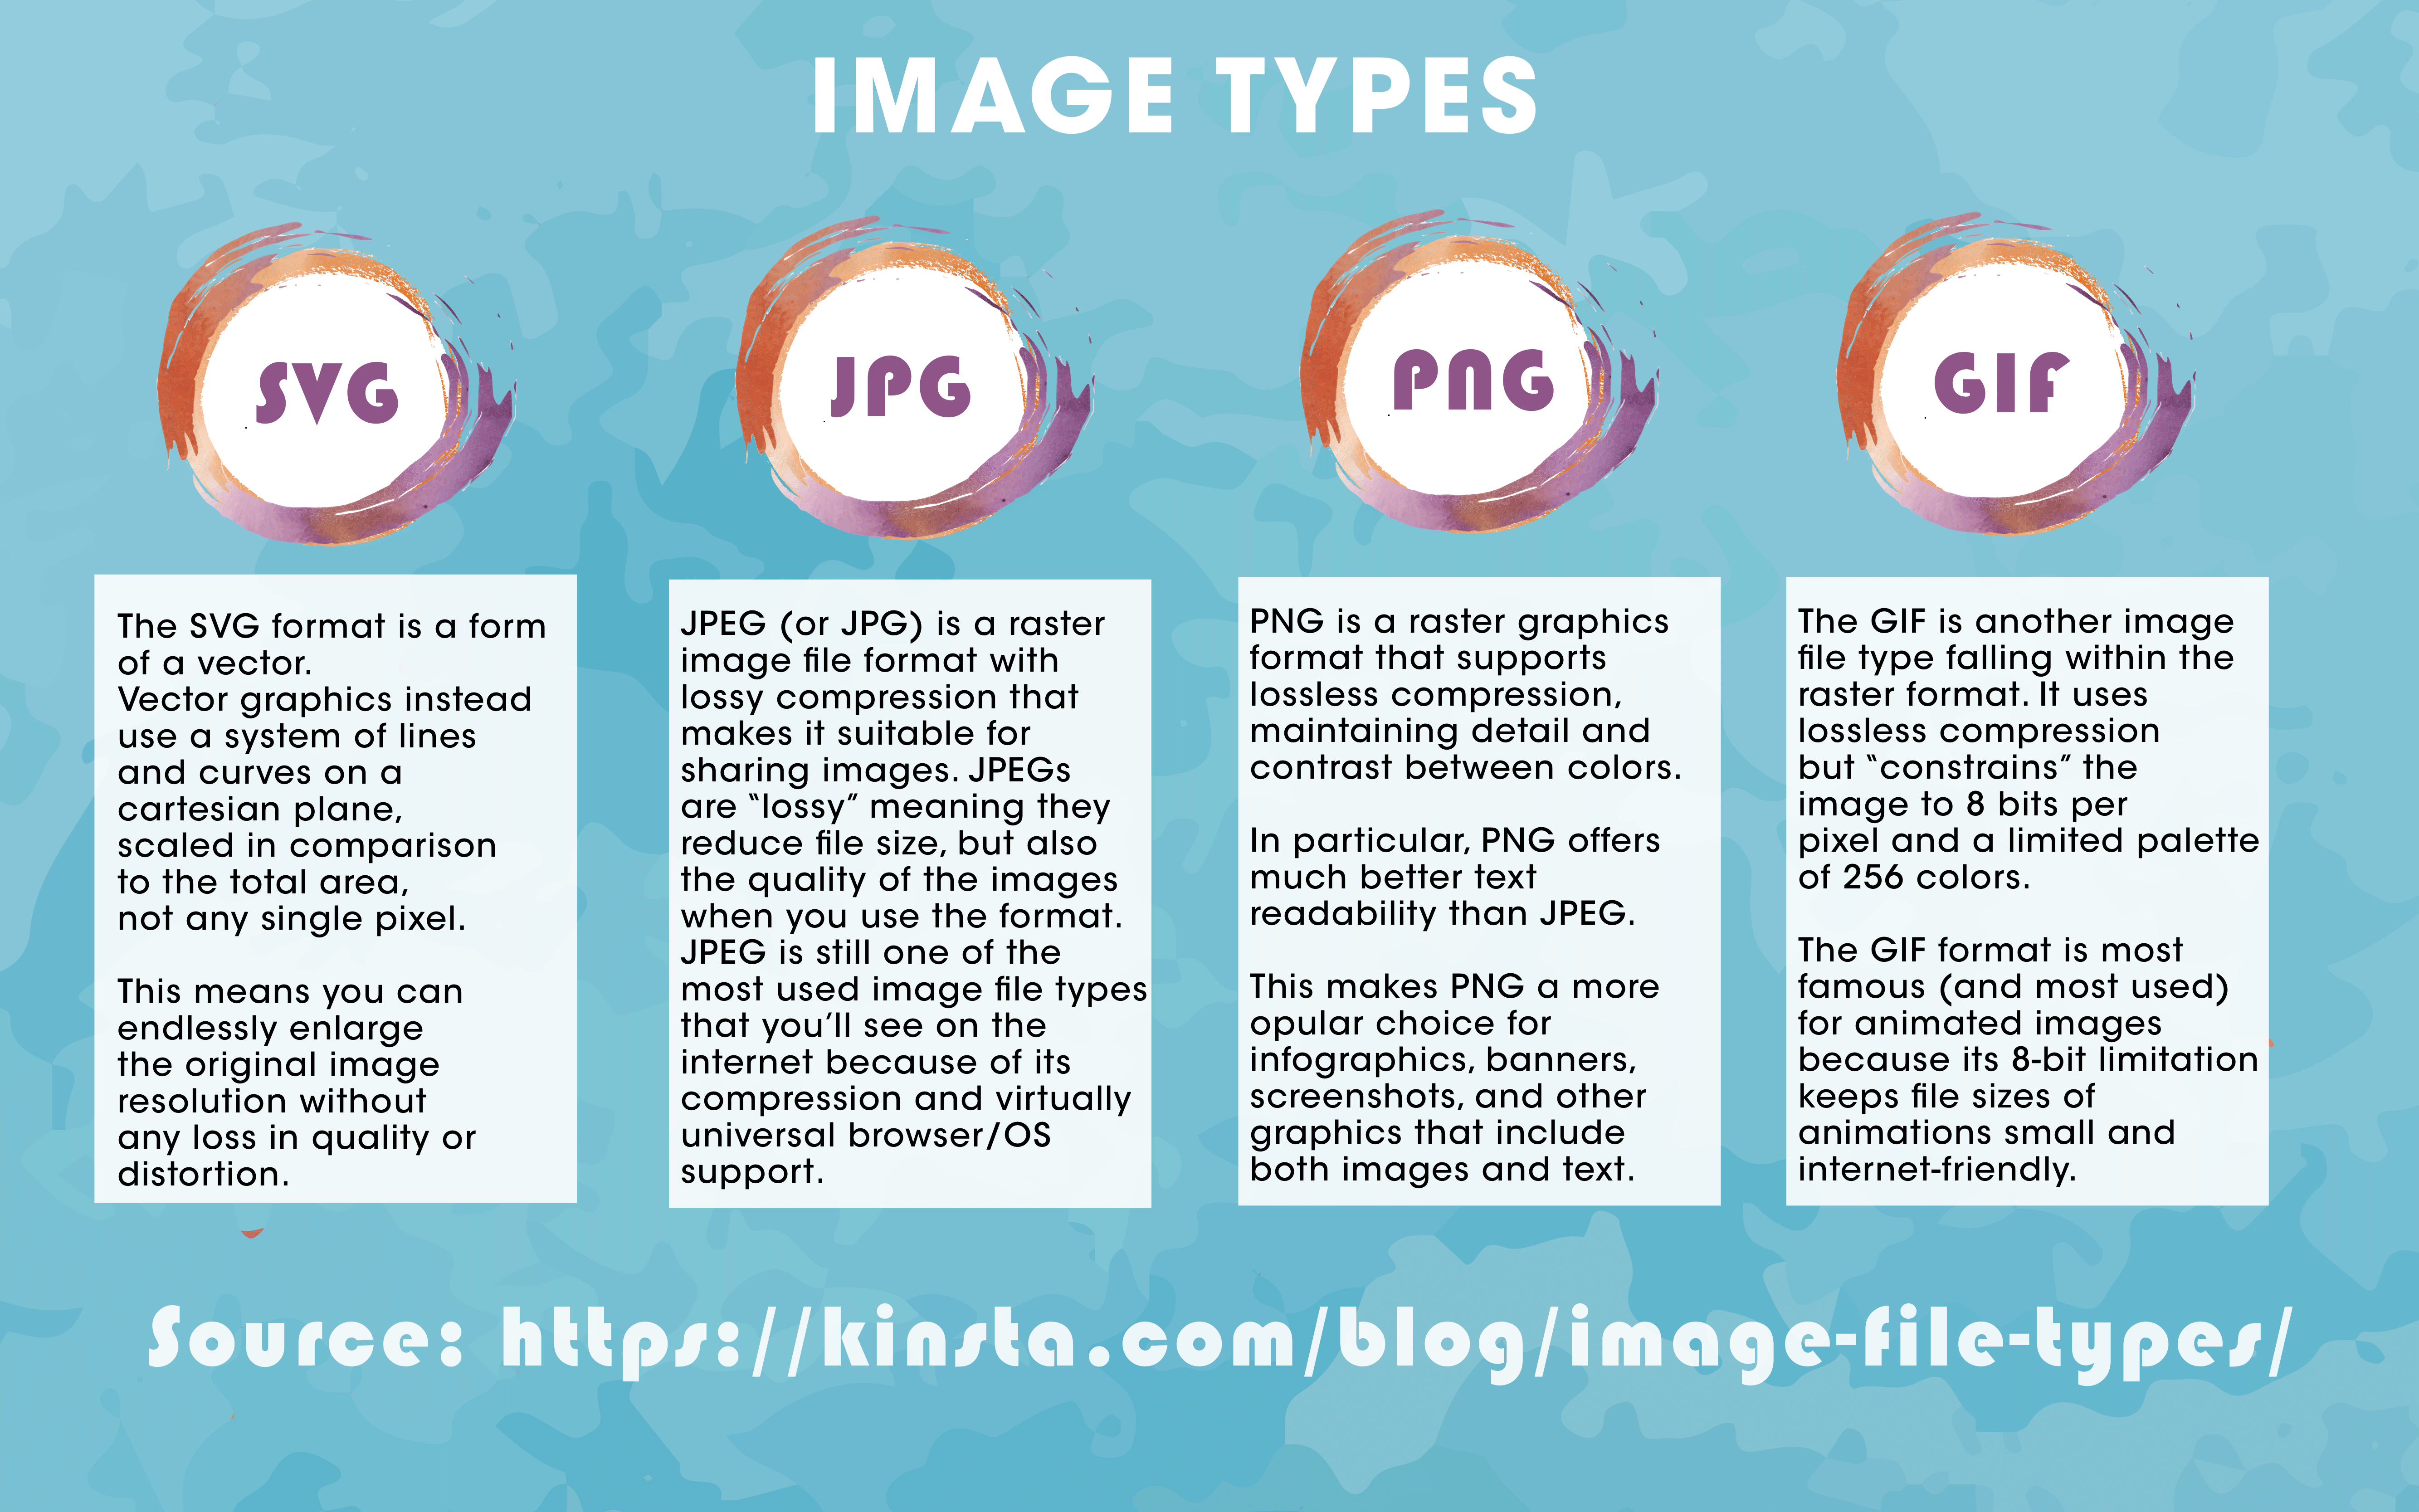 Graphic showing the different image types of svg, jpg, png and gif